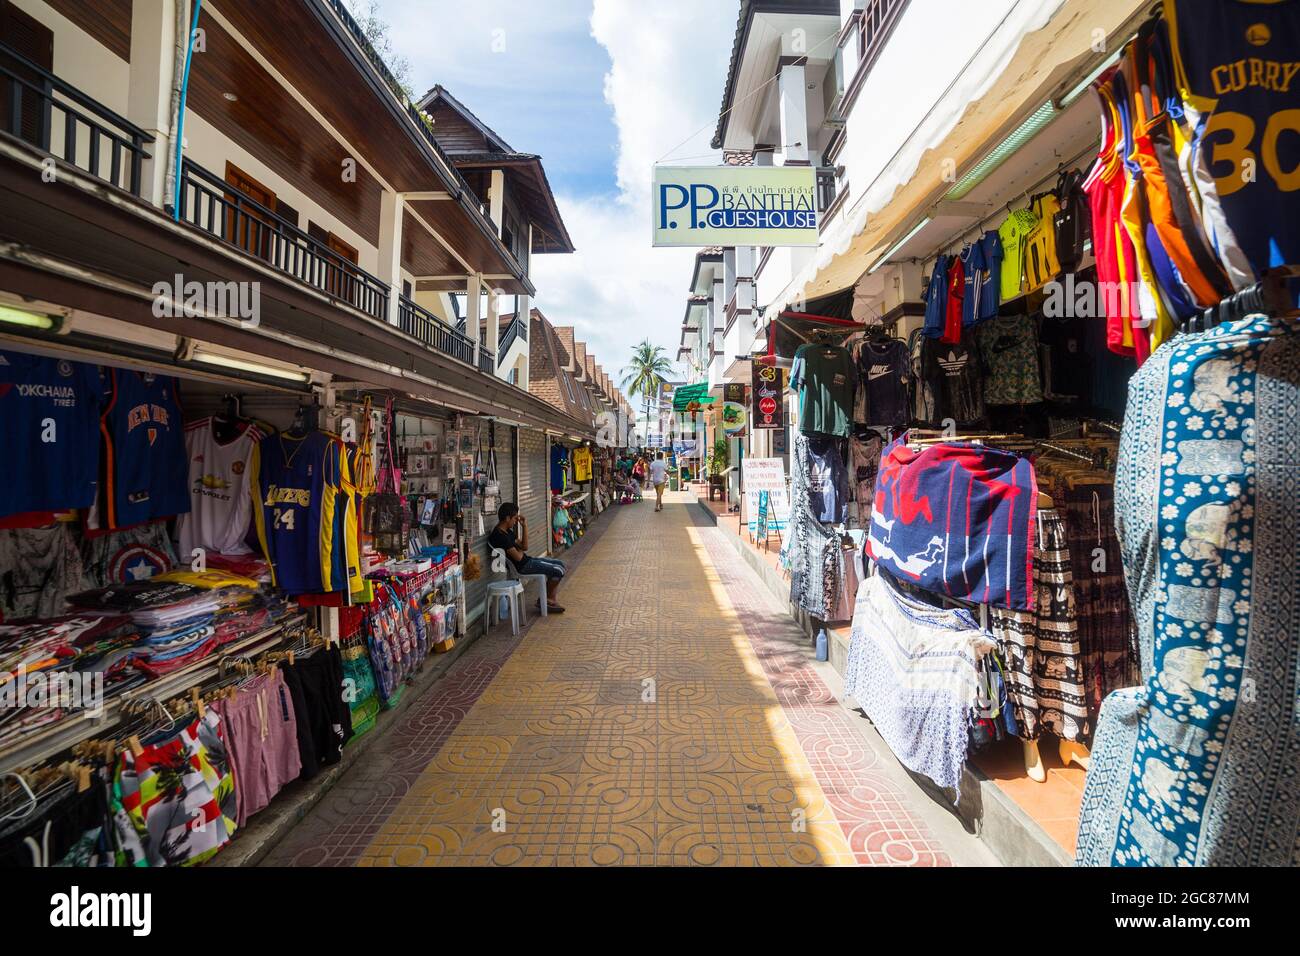 KO PHI PHI, THAILAND, 31ST MARCH 2017: Shops and streets on Ko Phi Phi island. Merchandise and people can be seen. Stock Photo